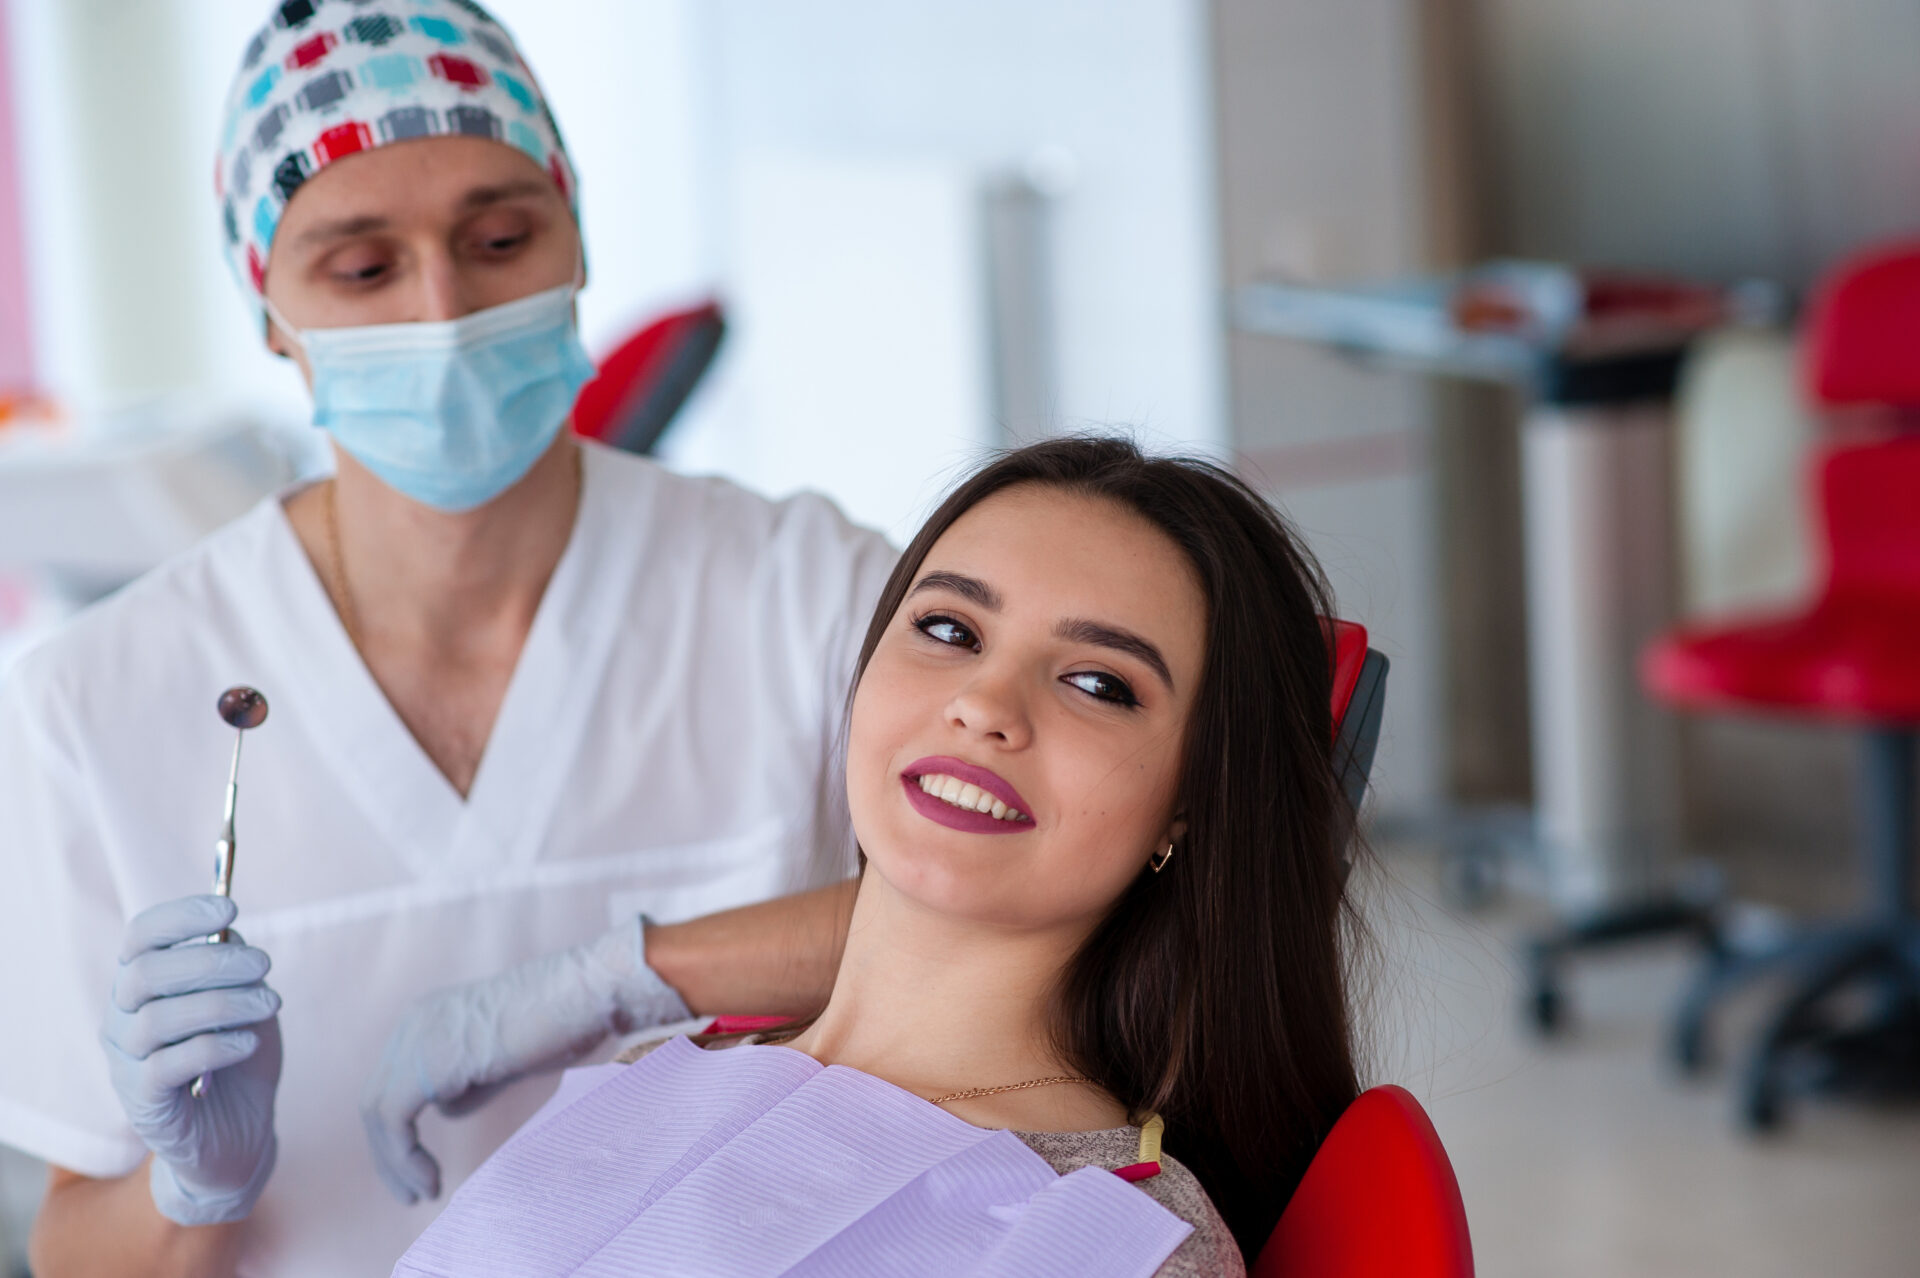 Portrait of a dentist and a beautiful girl in dentistry.